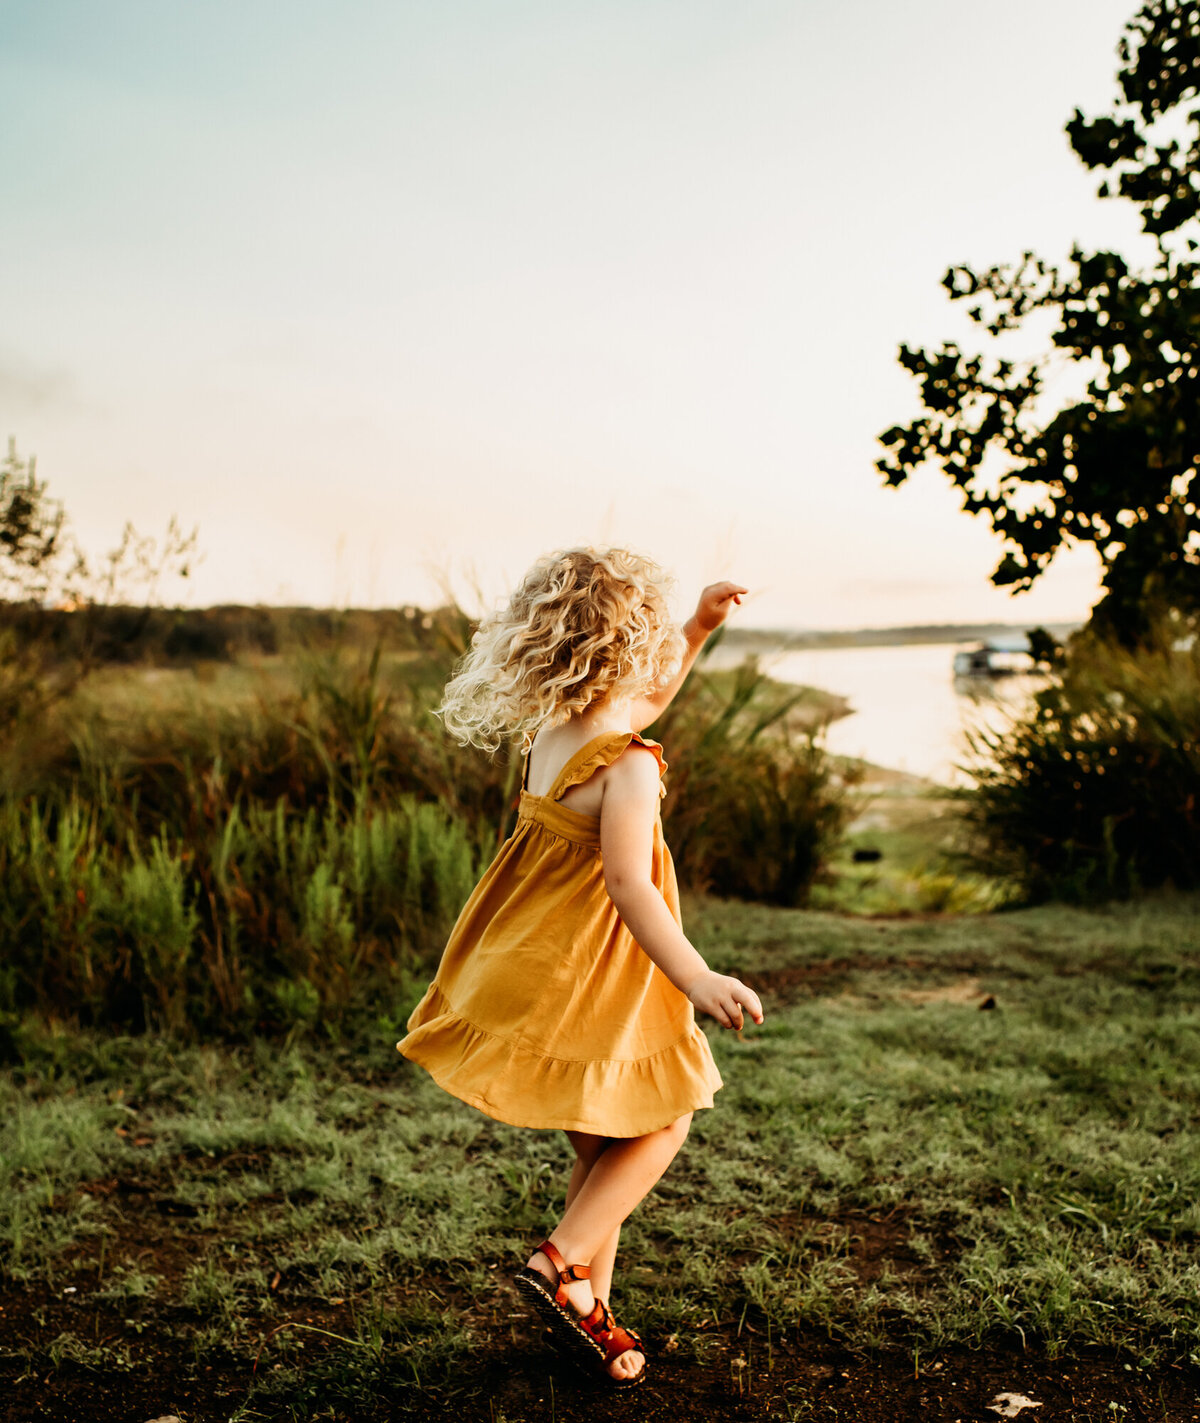 Little girl in a yellow dress twirling in the grass.